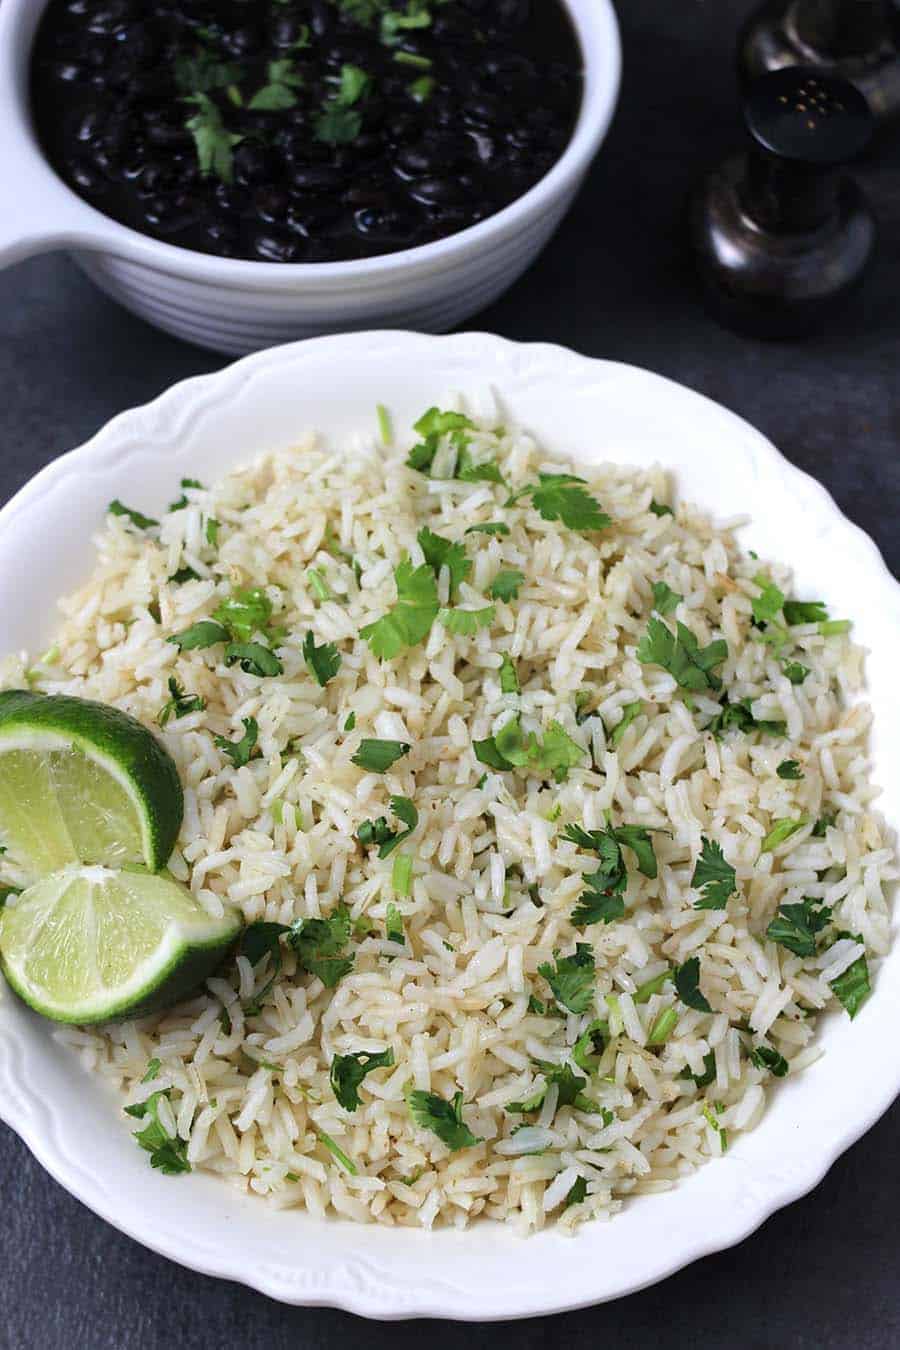 Cilantro Lime Rice, Authentic perfect Mexican Rice, Instant pot mexican rice recipes, mexican rice chickenbowls recipes, mexican jasmine rice, how to make restaurant style mexican rice, copycat Chipotle style recipes, best and easy Mexican food recipes for cinco de mayo party, dinner, desserts, keto, vegan, vegetarian vegan keto low carb healthy cinco de mayo party food ideas,